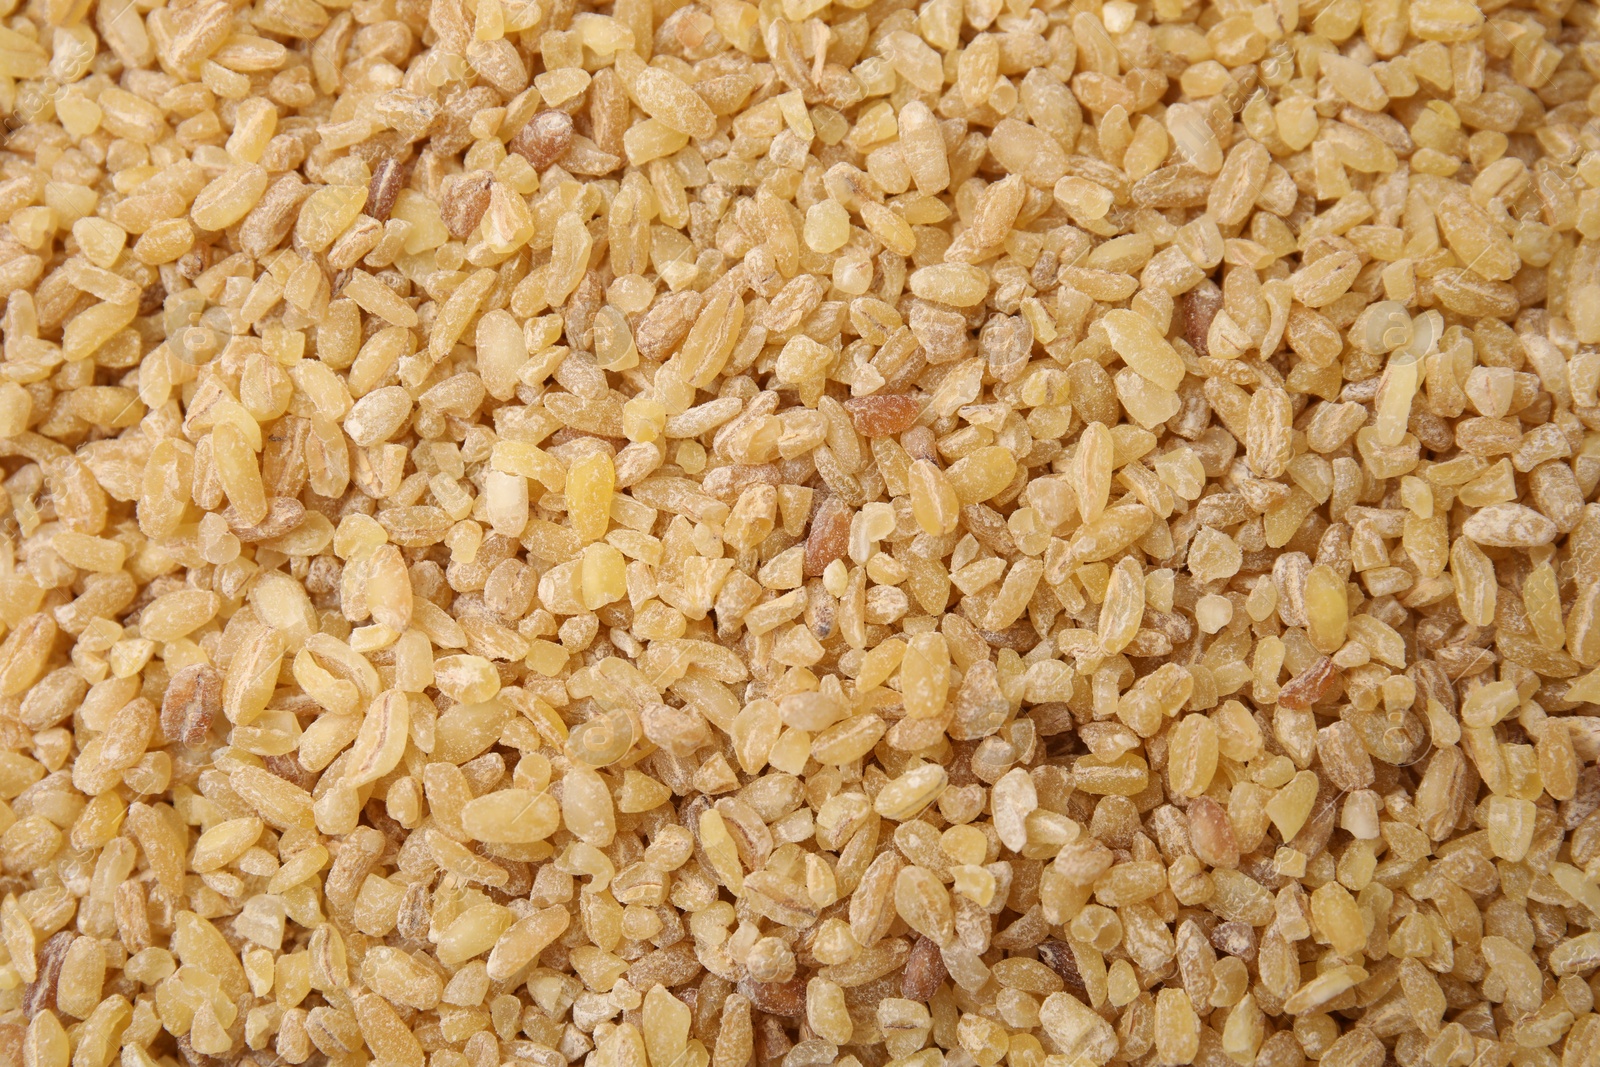 Photo of Uncooked organic bulgur as background, top view